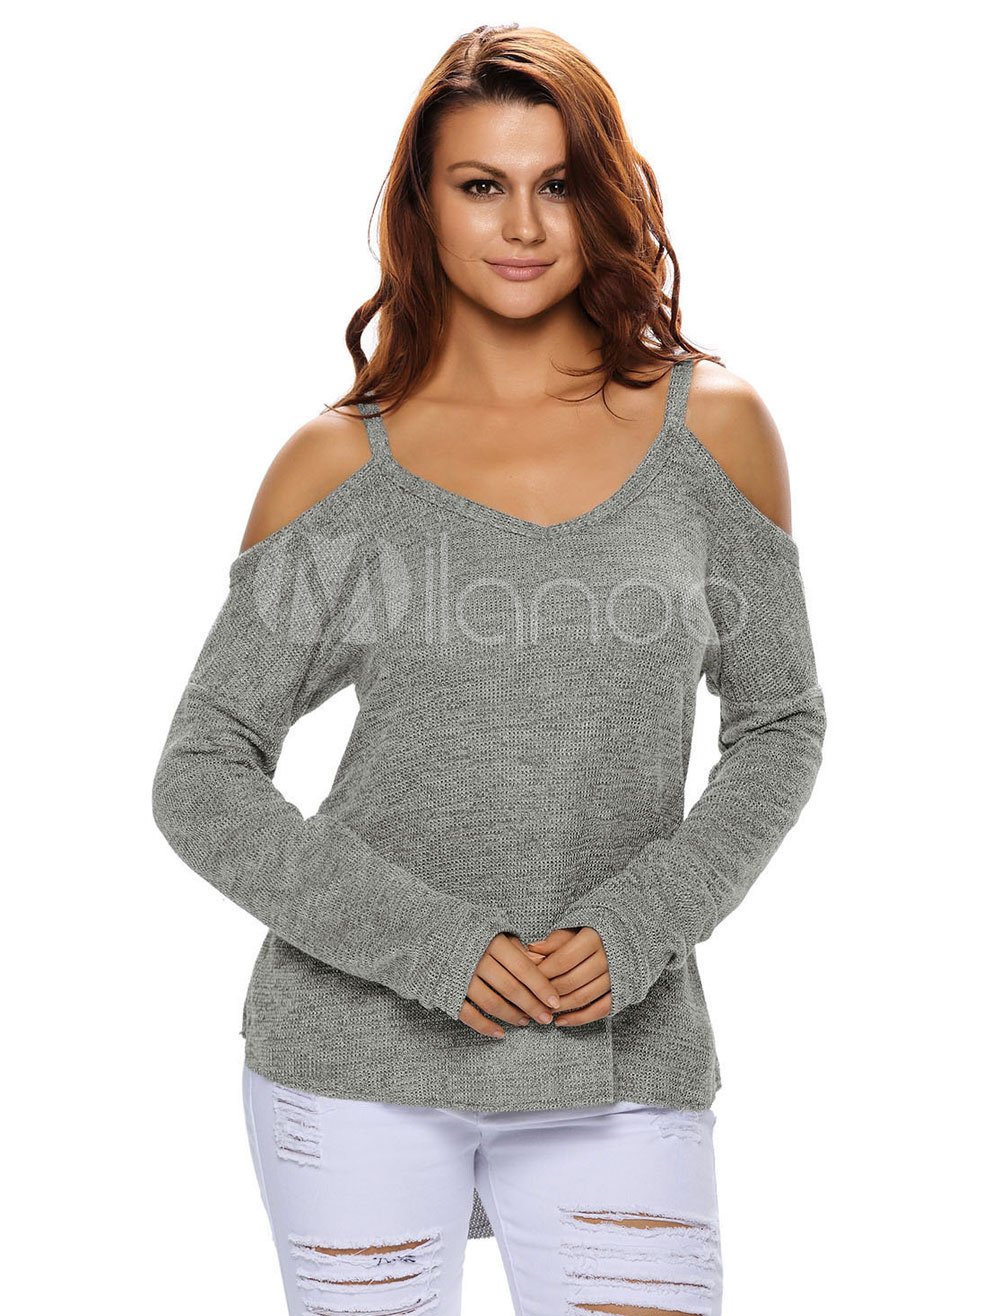 Long Sleeve T-shirt White Women's Cold Shoulder U-neck High Low Casual ...